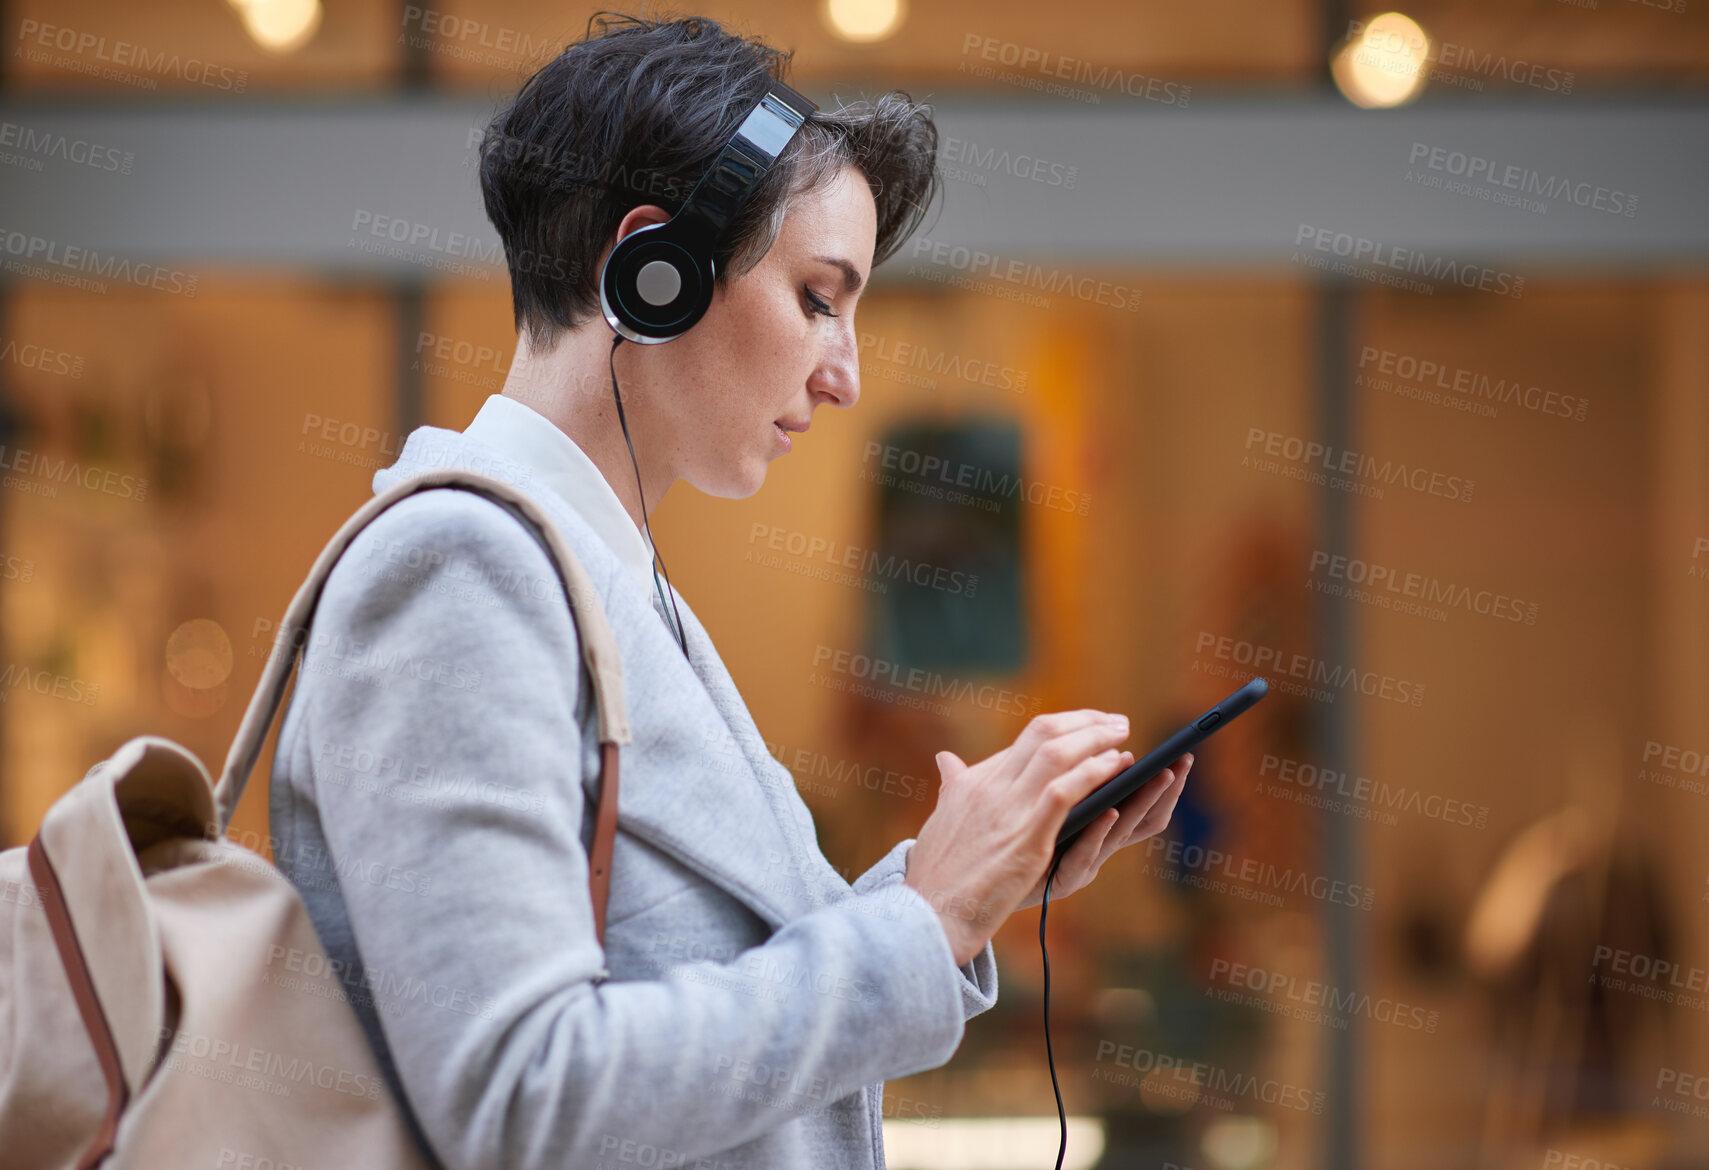 Buy stock photo Phone, music headphones and business woman in city streaming radio or podcast. Urban street, cellphone and female entrepreneur with 5g mobile smartphone for networking, social media or web browsing.